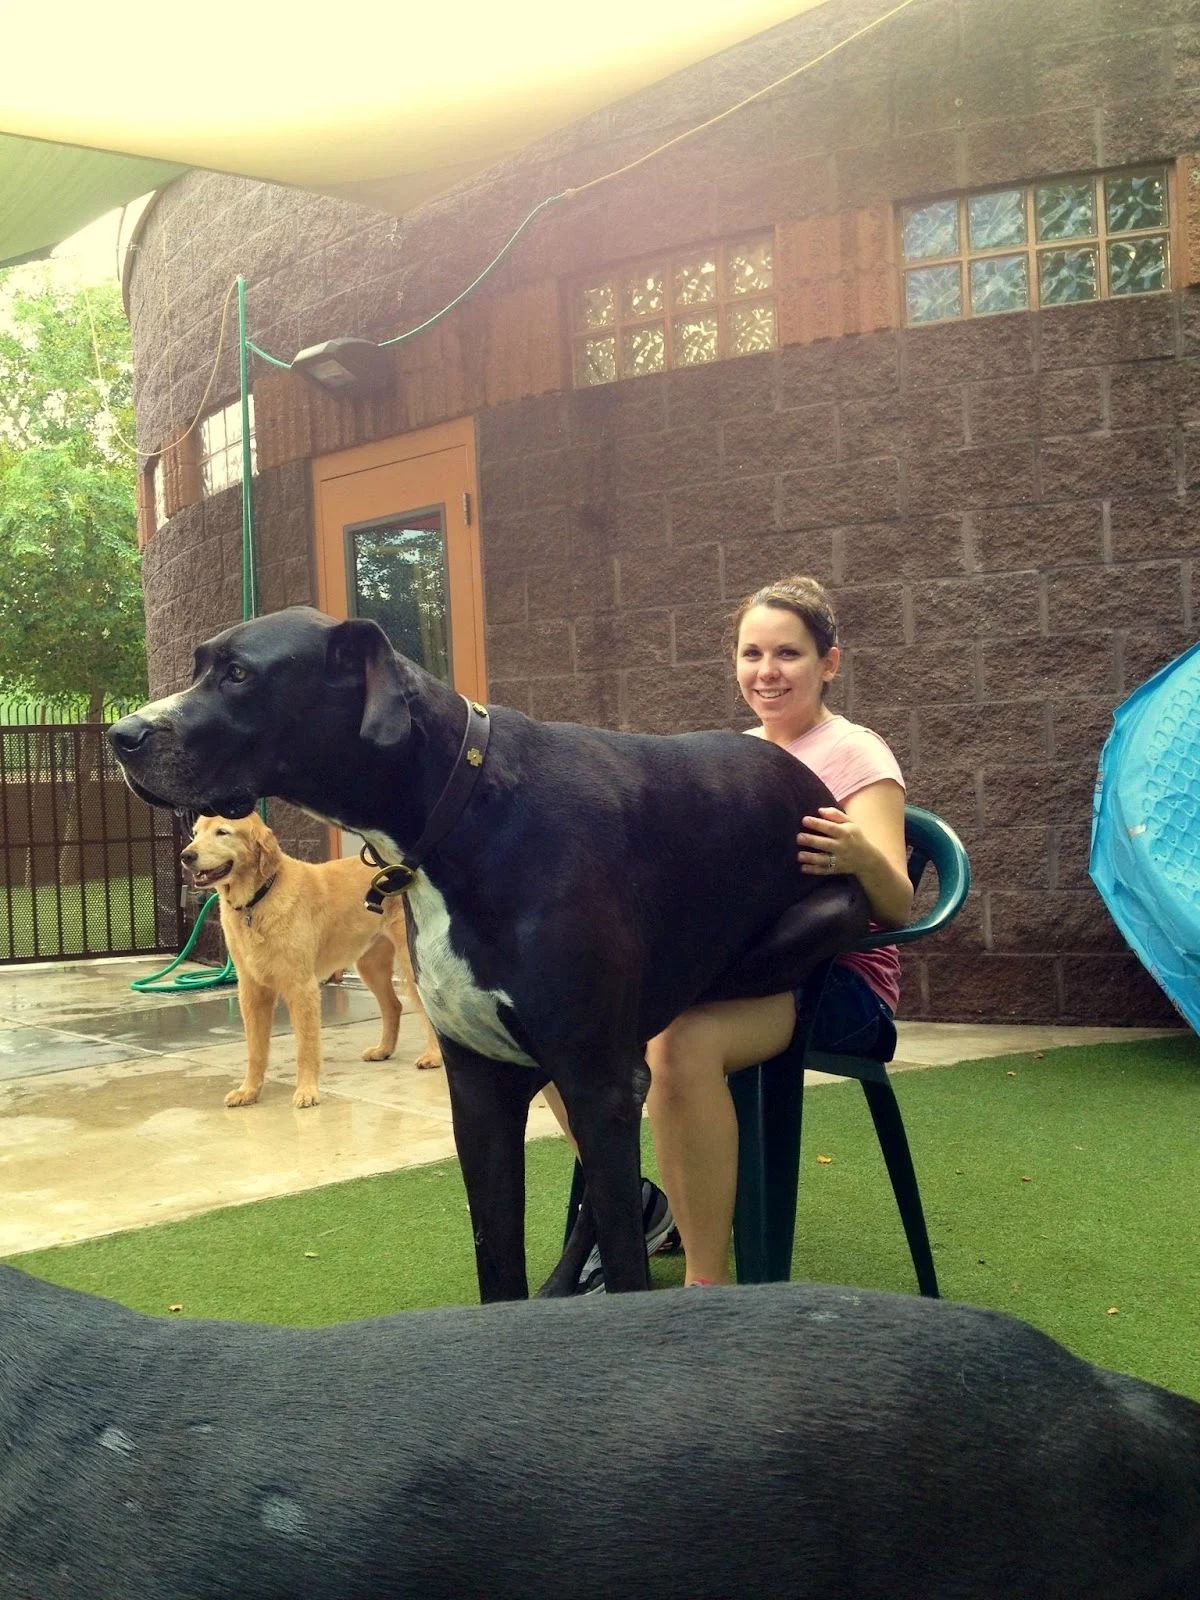 black and white great dane stting on a woman's lap with the dog's front legs on the lawn and a golden retriever in the background